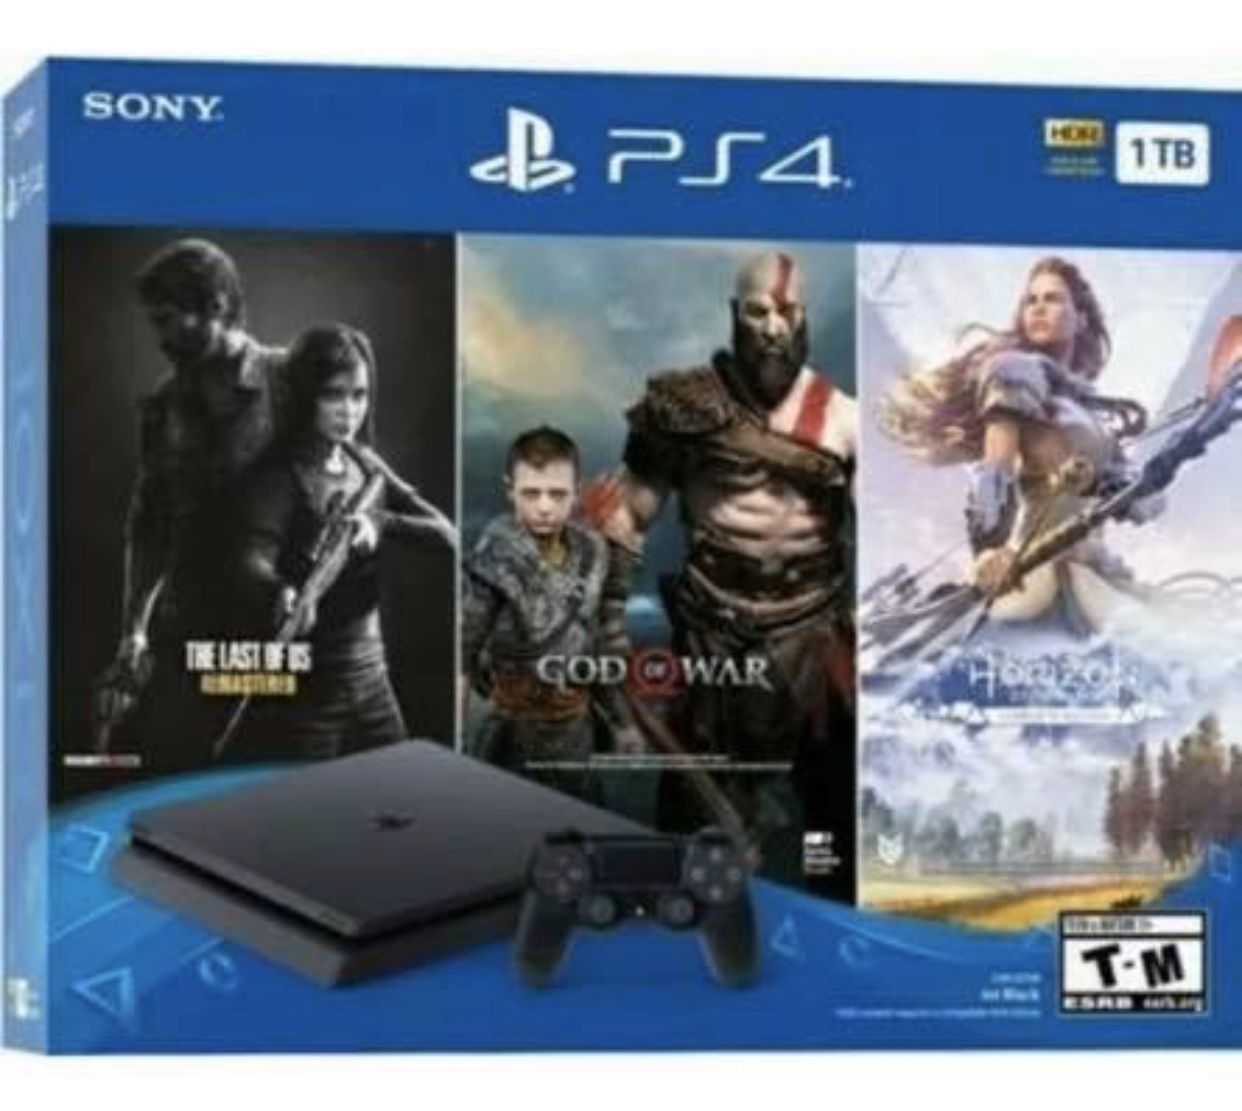 BRAND NEW PS4 1 TB BUNDLE WITH 3 GAMES AND NOISE CANCELLING GAMING HEADSET